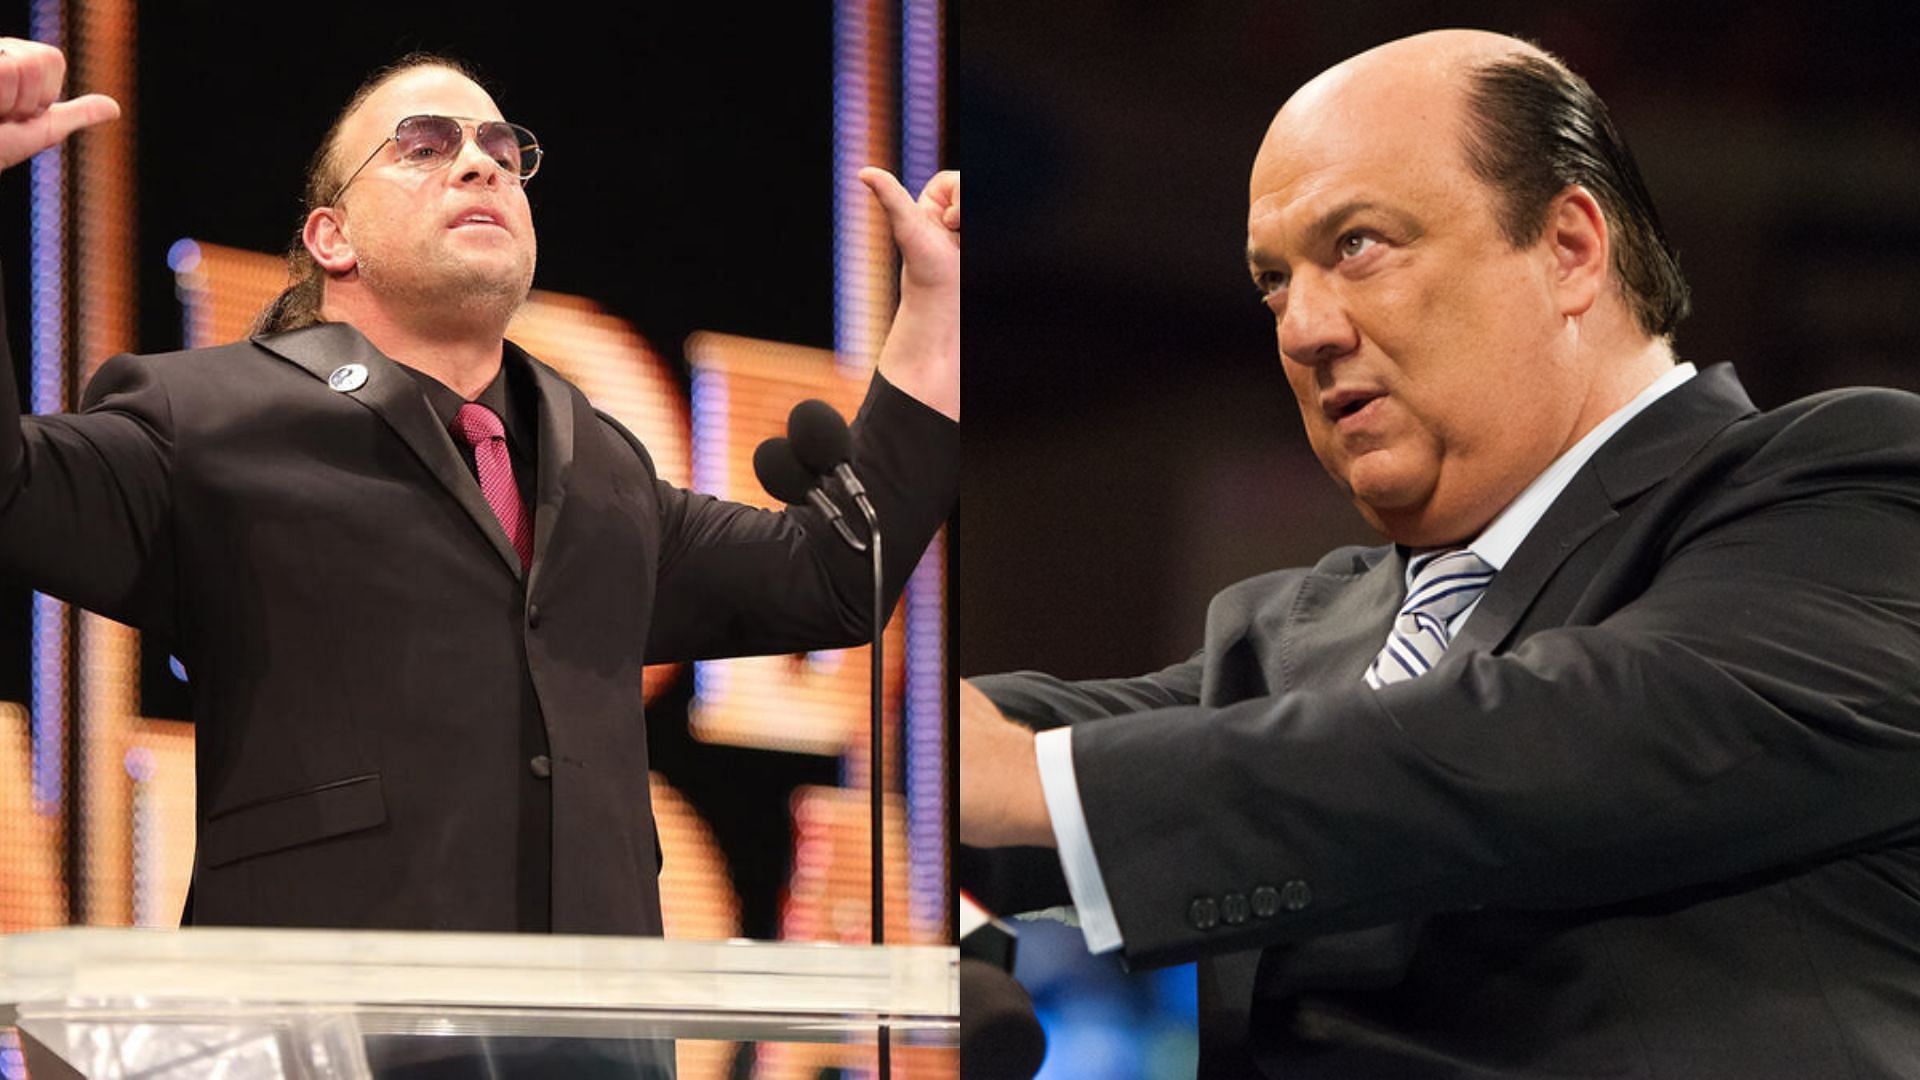 Rob Van Dam and Paul Heyman will both be in the WWE Hall of Fame after this year [Photos courtesy of WWE